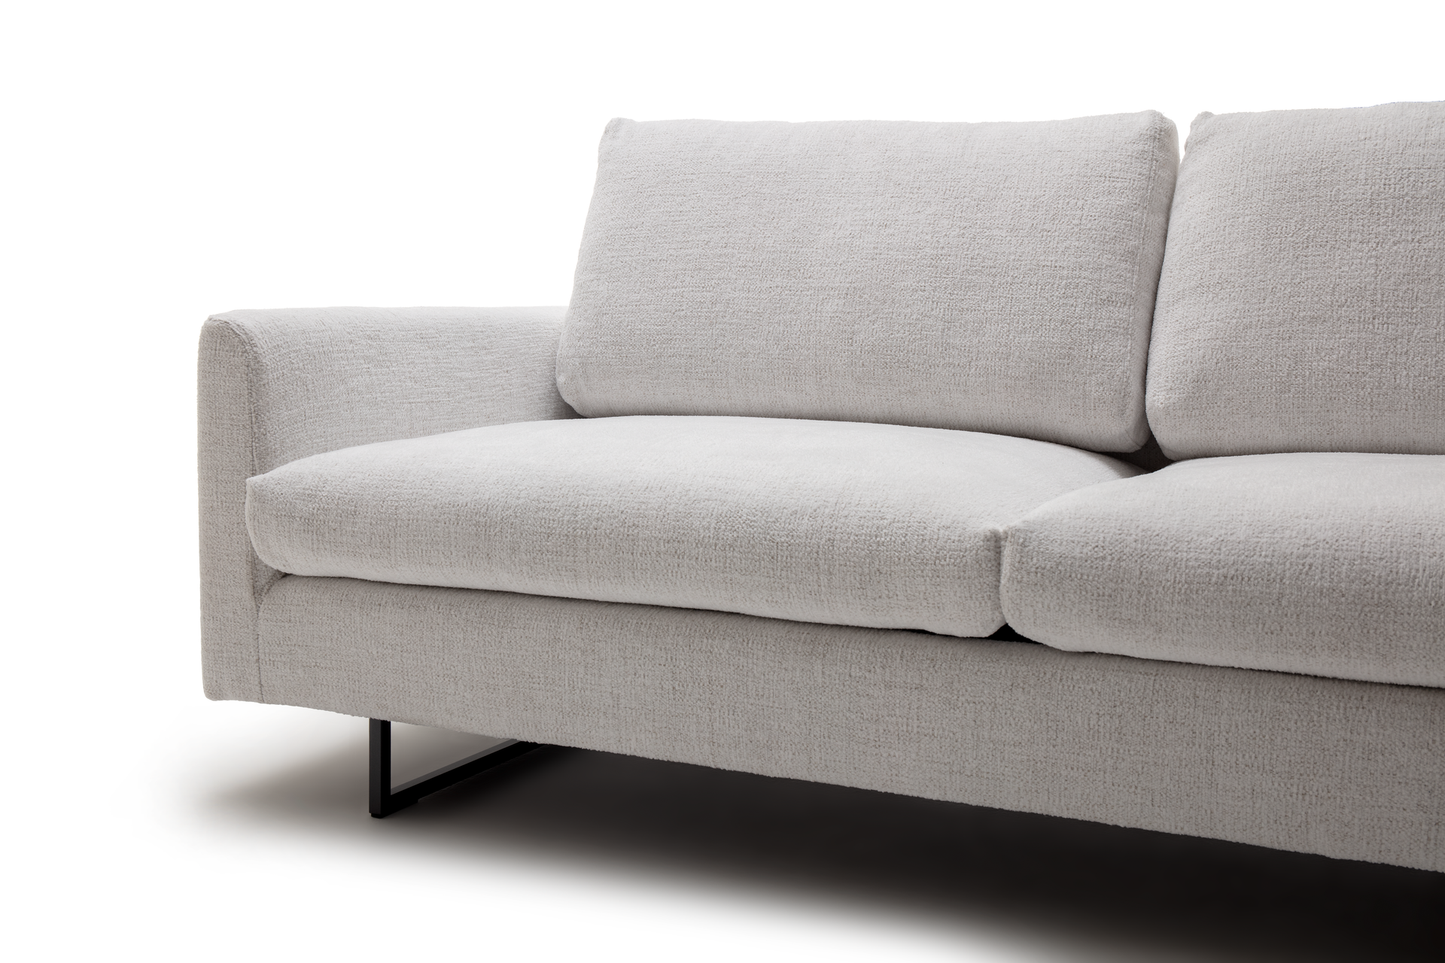 Freistil by Rolf Benz 134 Sofa in white beige signal grey fabric with square skid legs